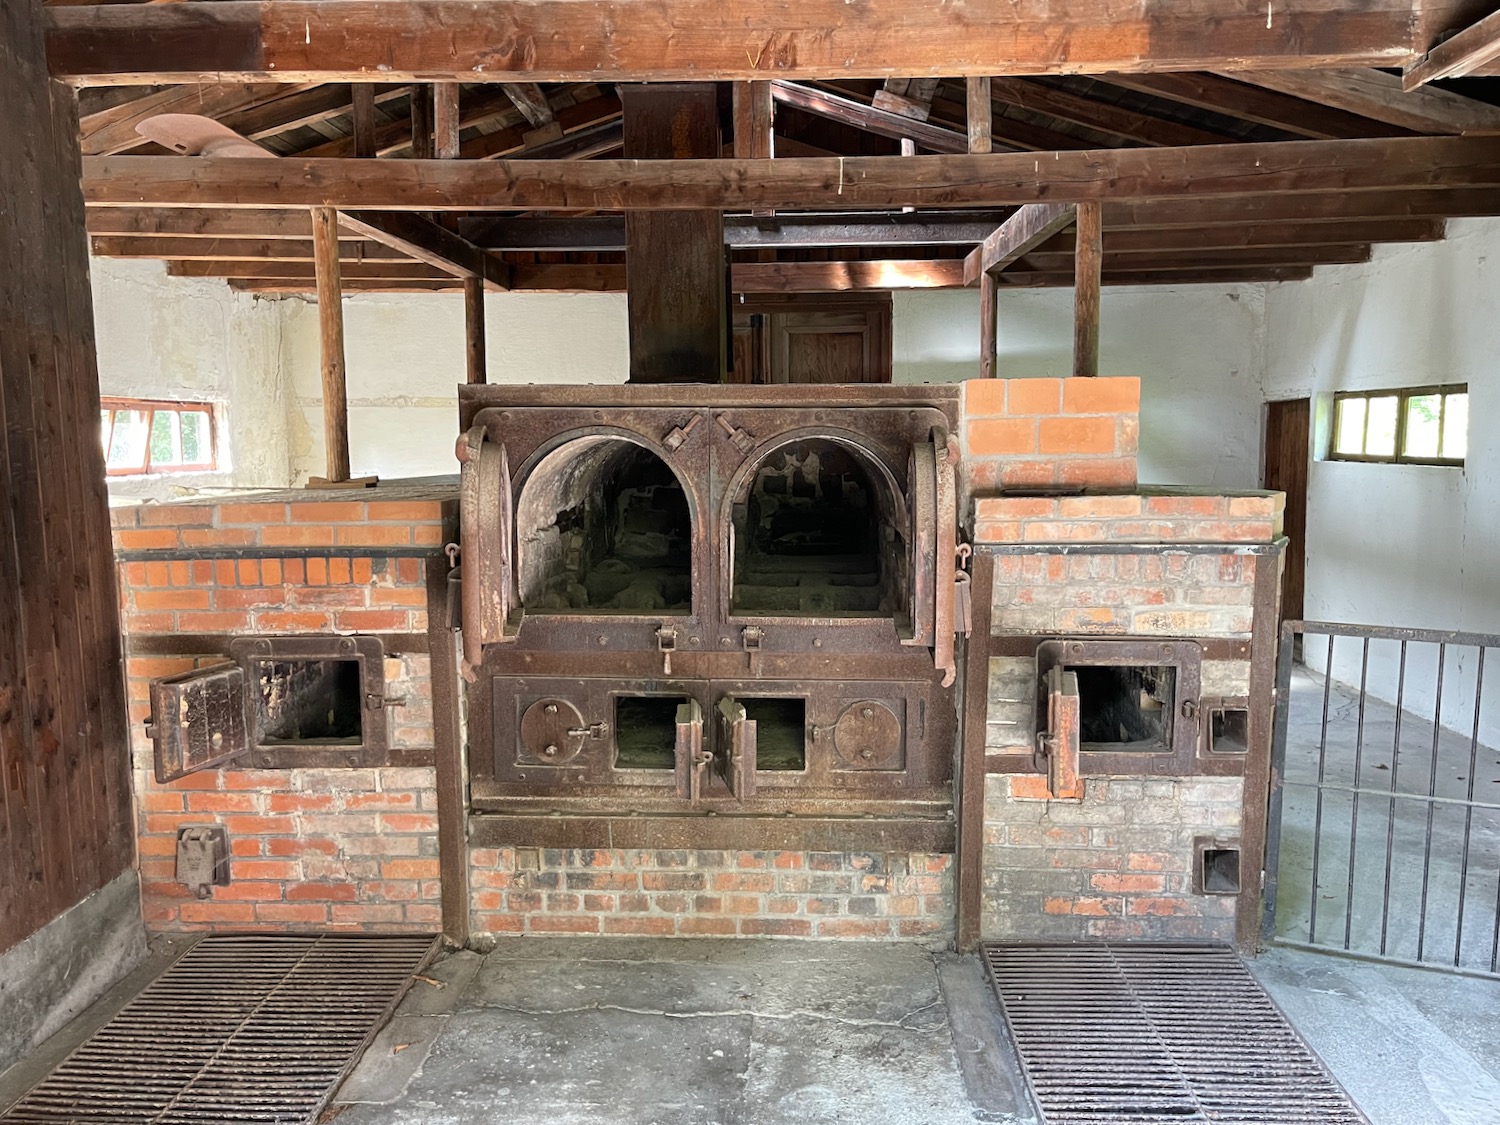 an old brick oven